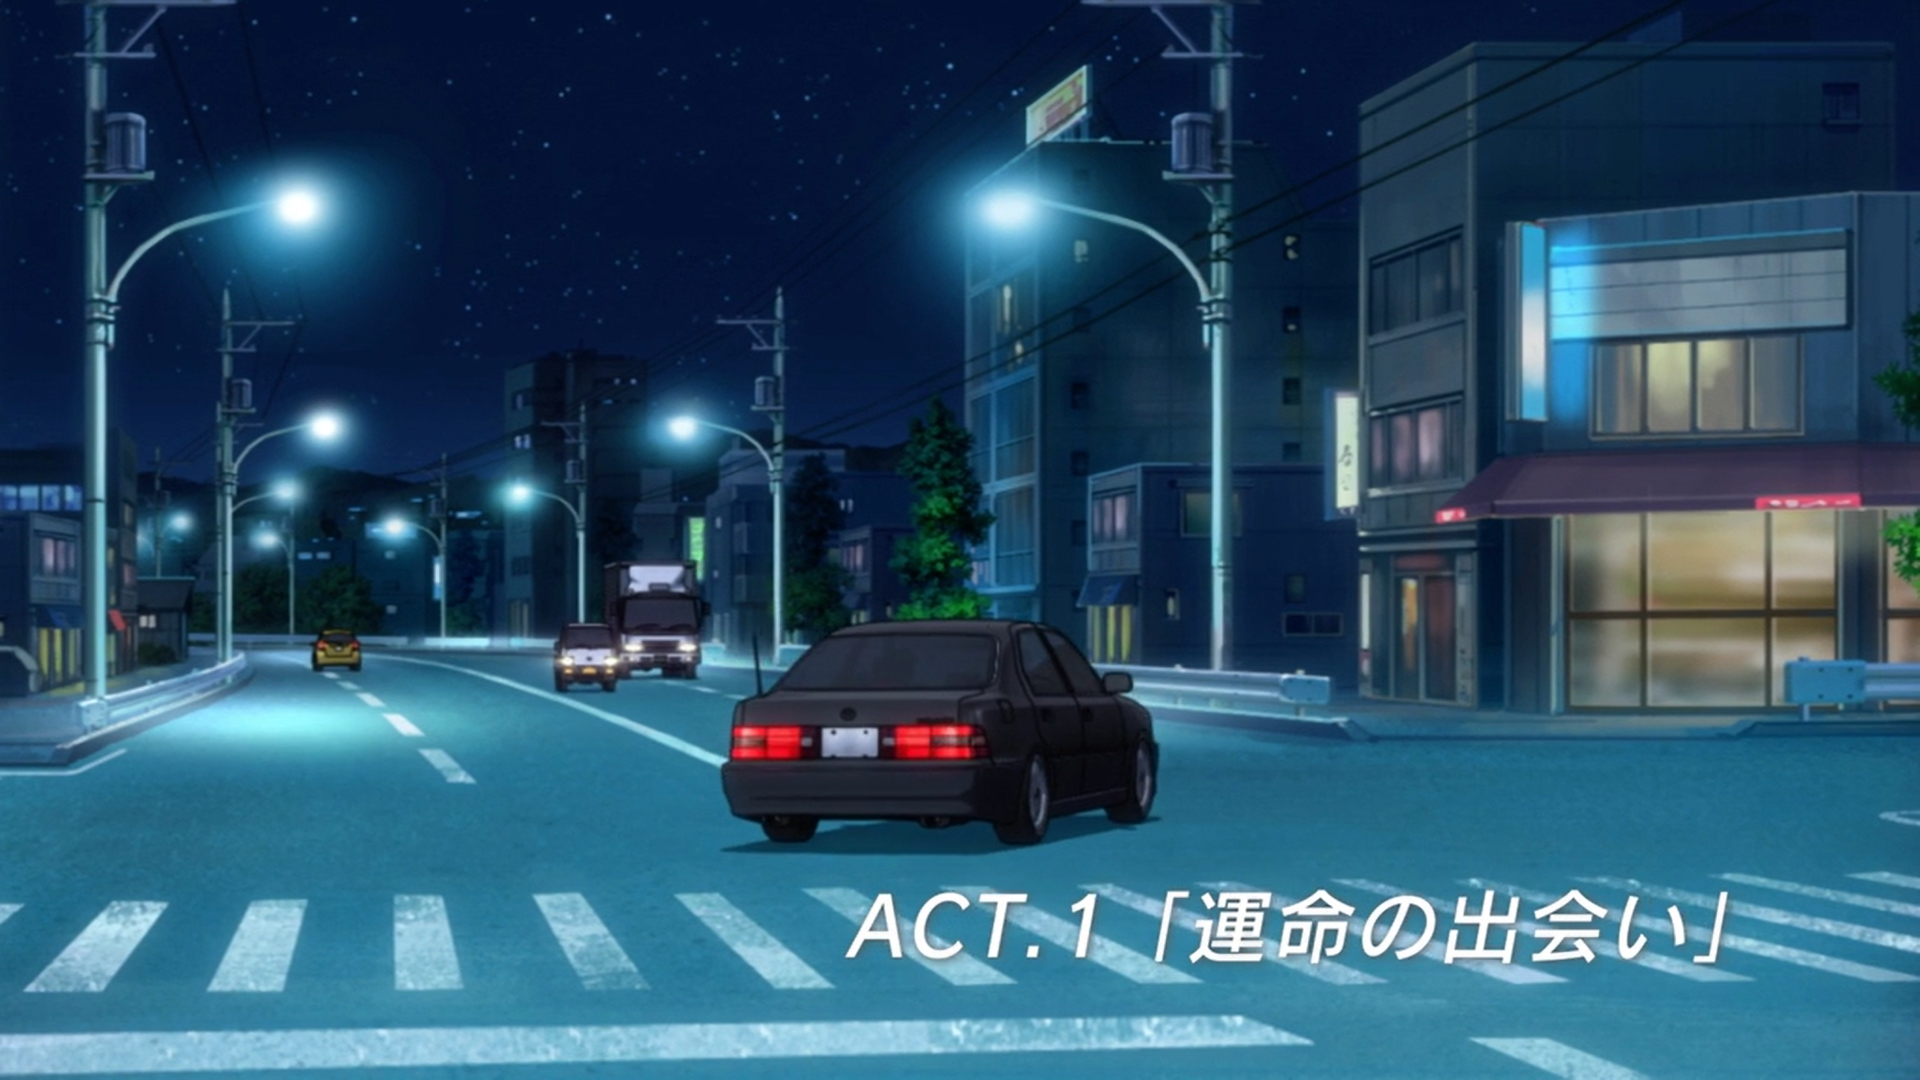 initial d fifth stage eps 1 - BiliBili